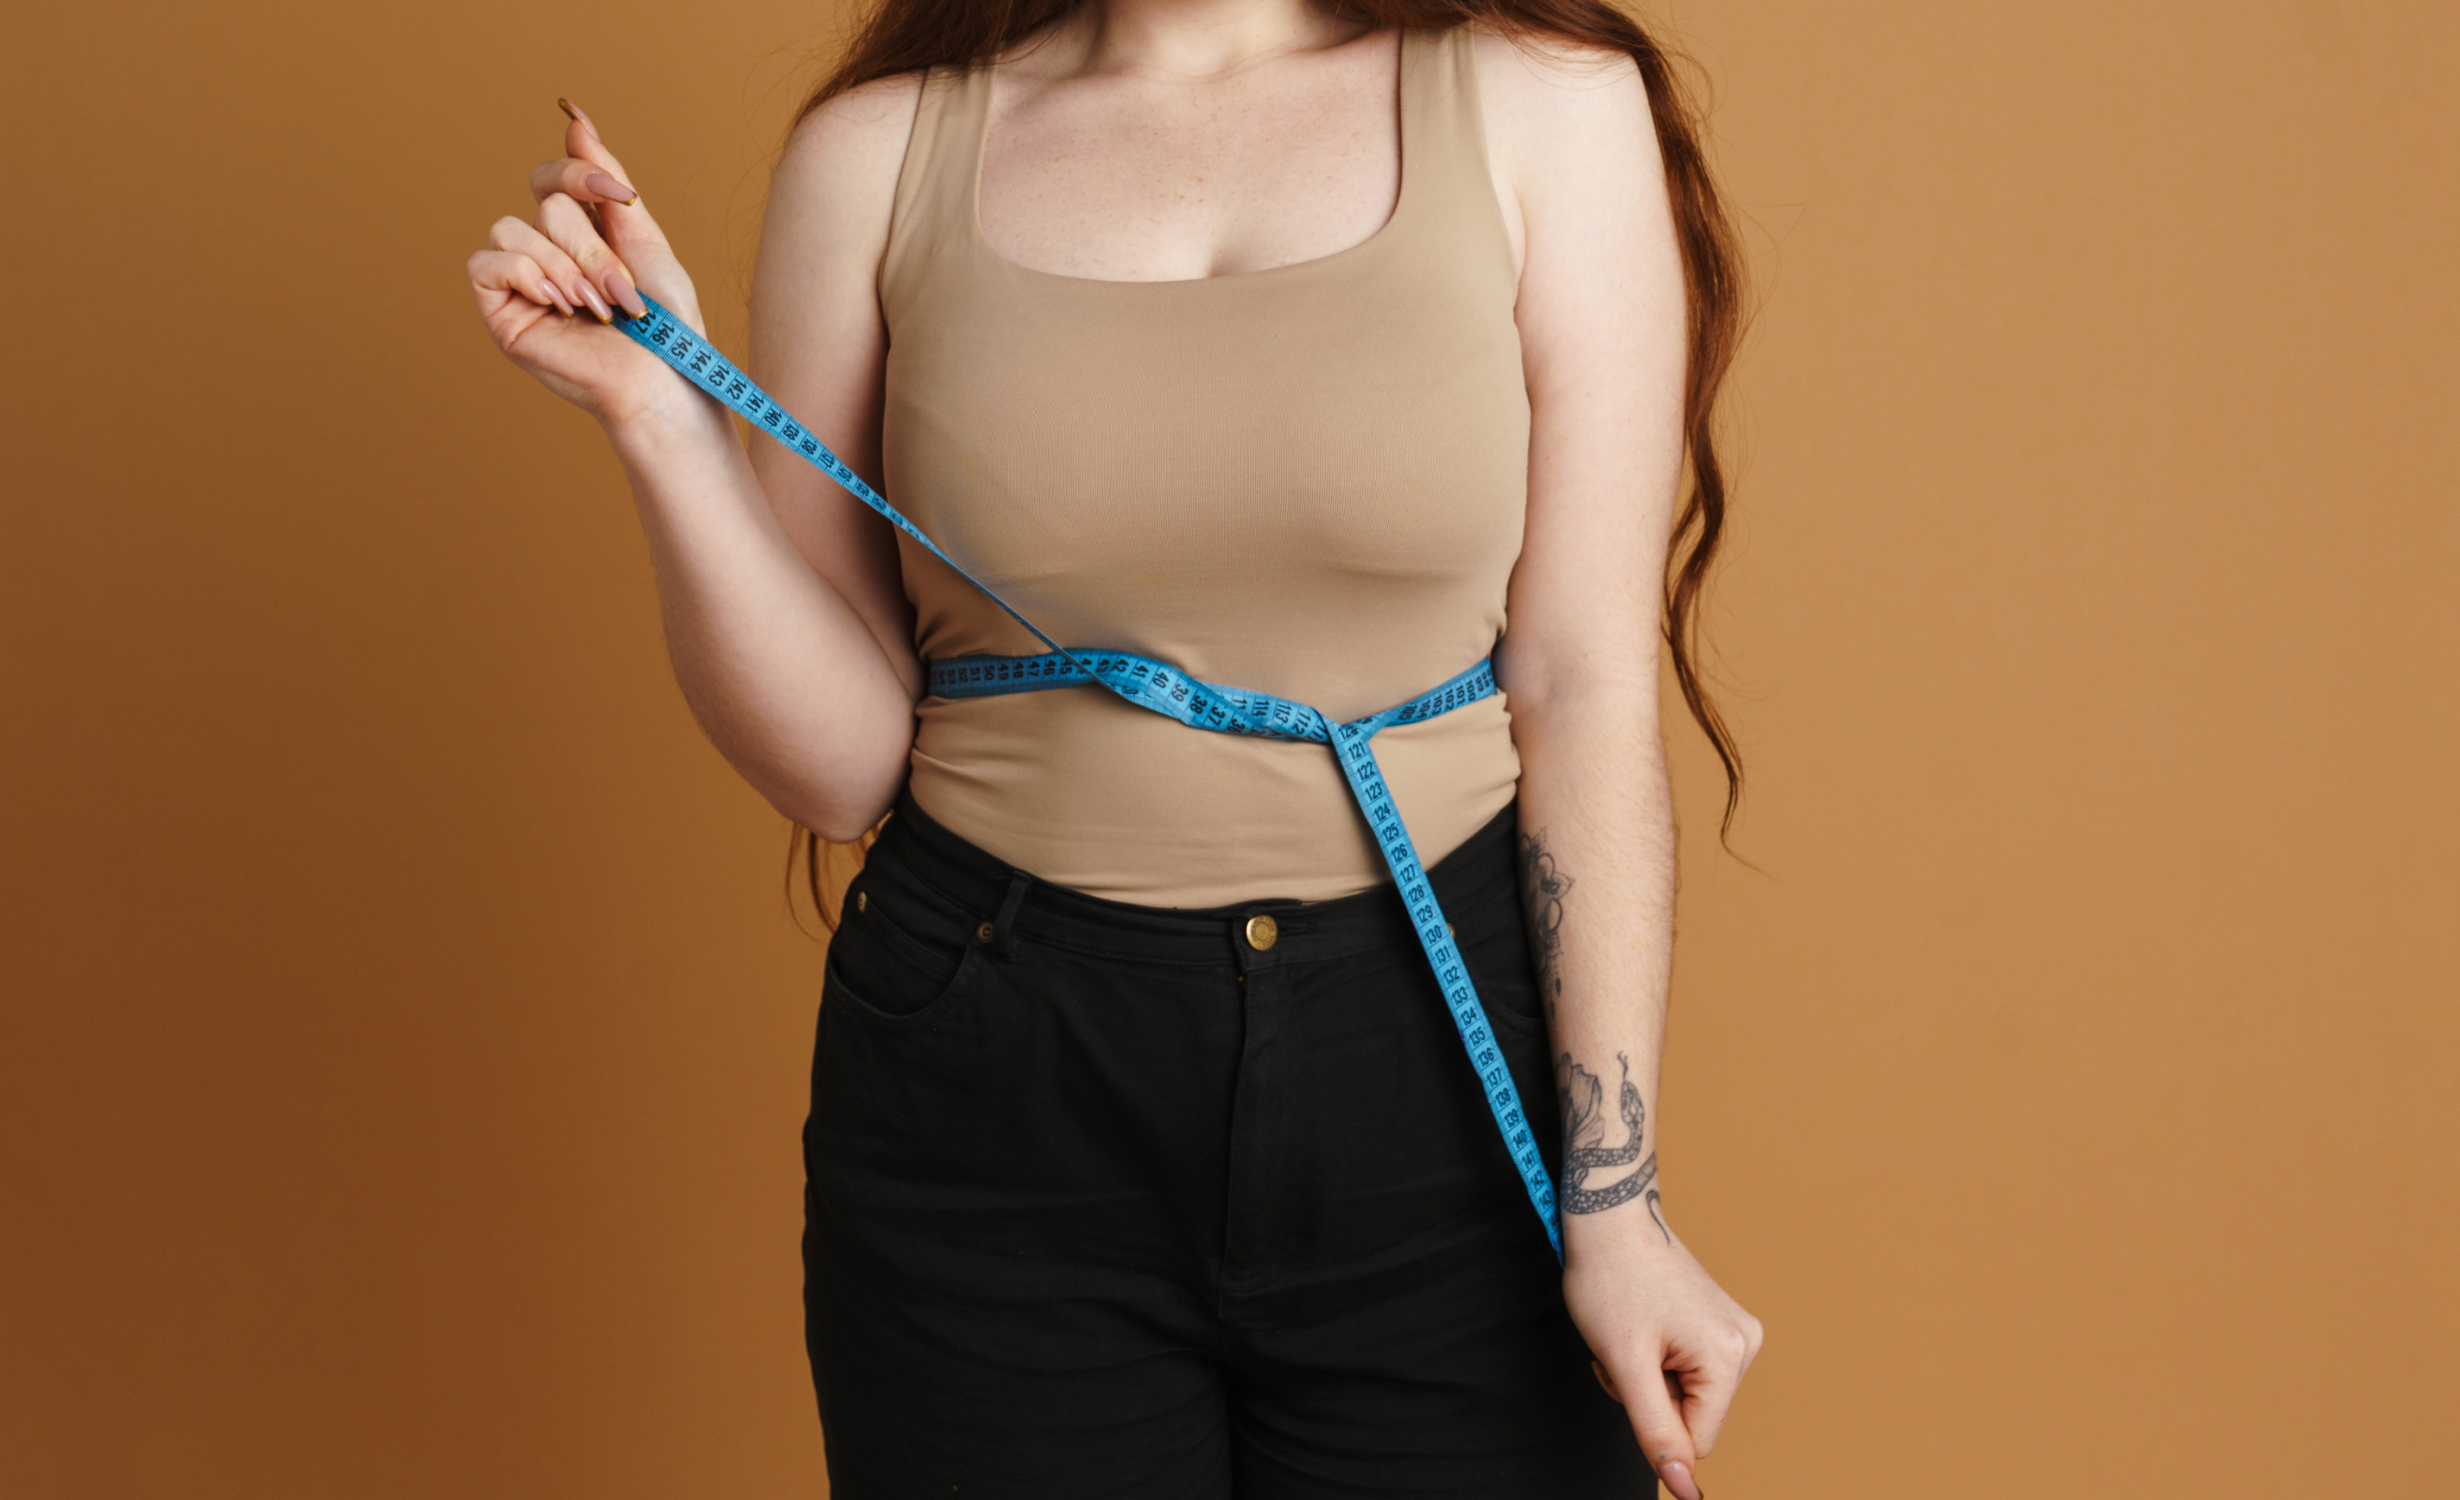 A person in a beige tank top and black pants holding a measuring tape around their waist, depicting symptoms of slowed metabolism conditions.